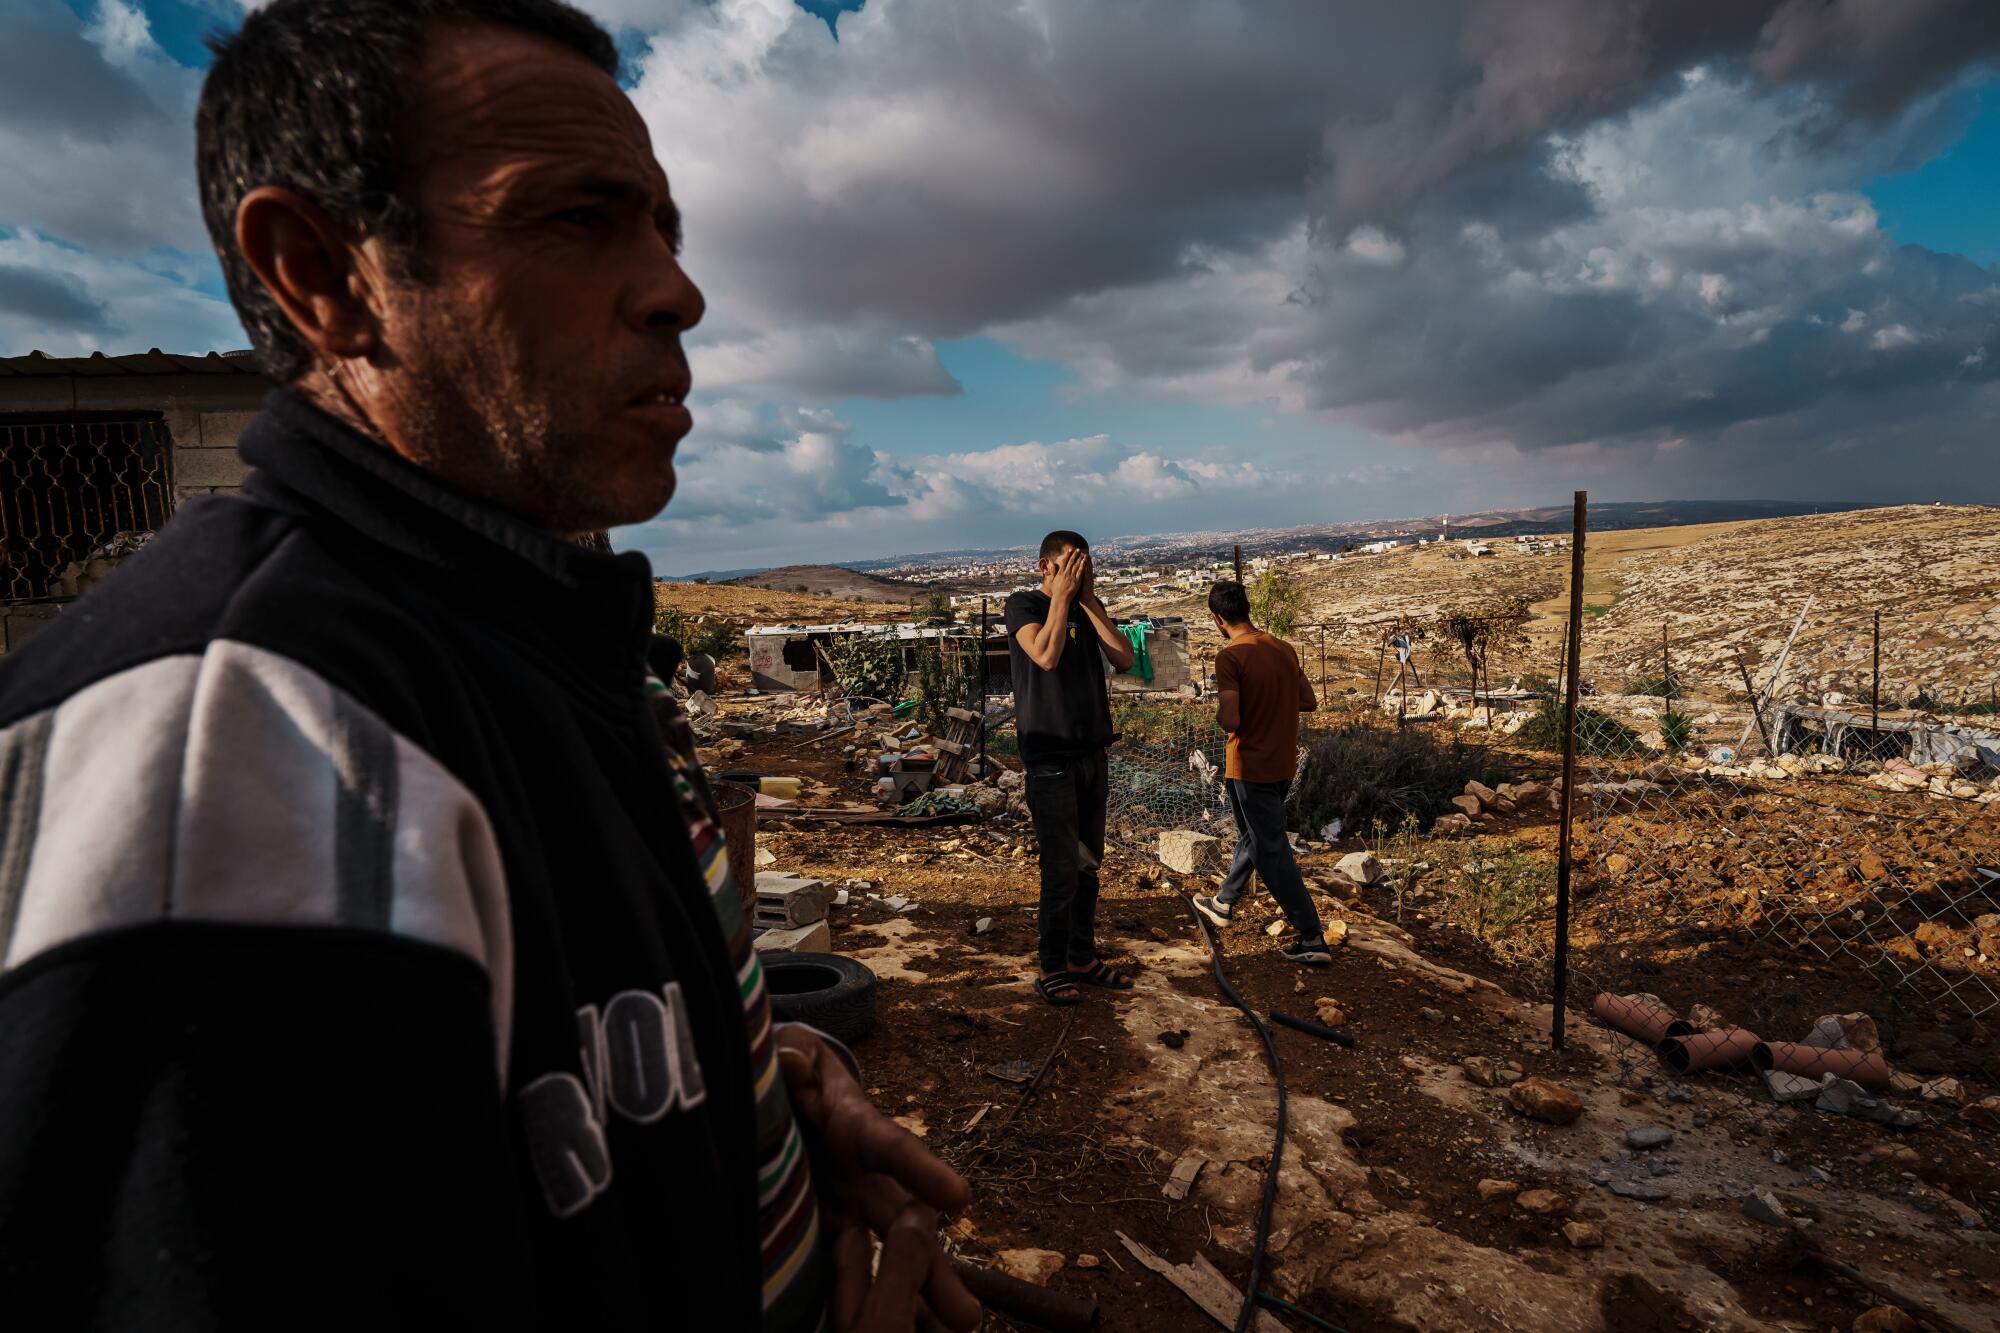 Mohammad Abed inspects the damage to his home and farmland, by Israeli settlers.